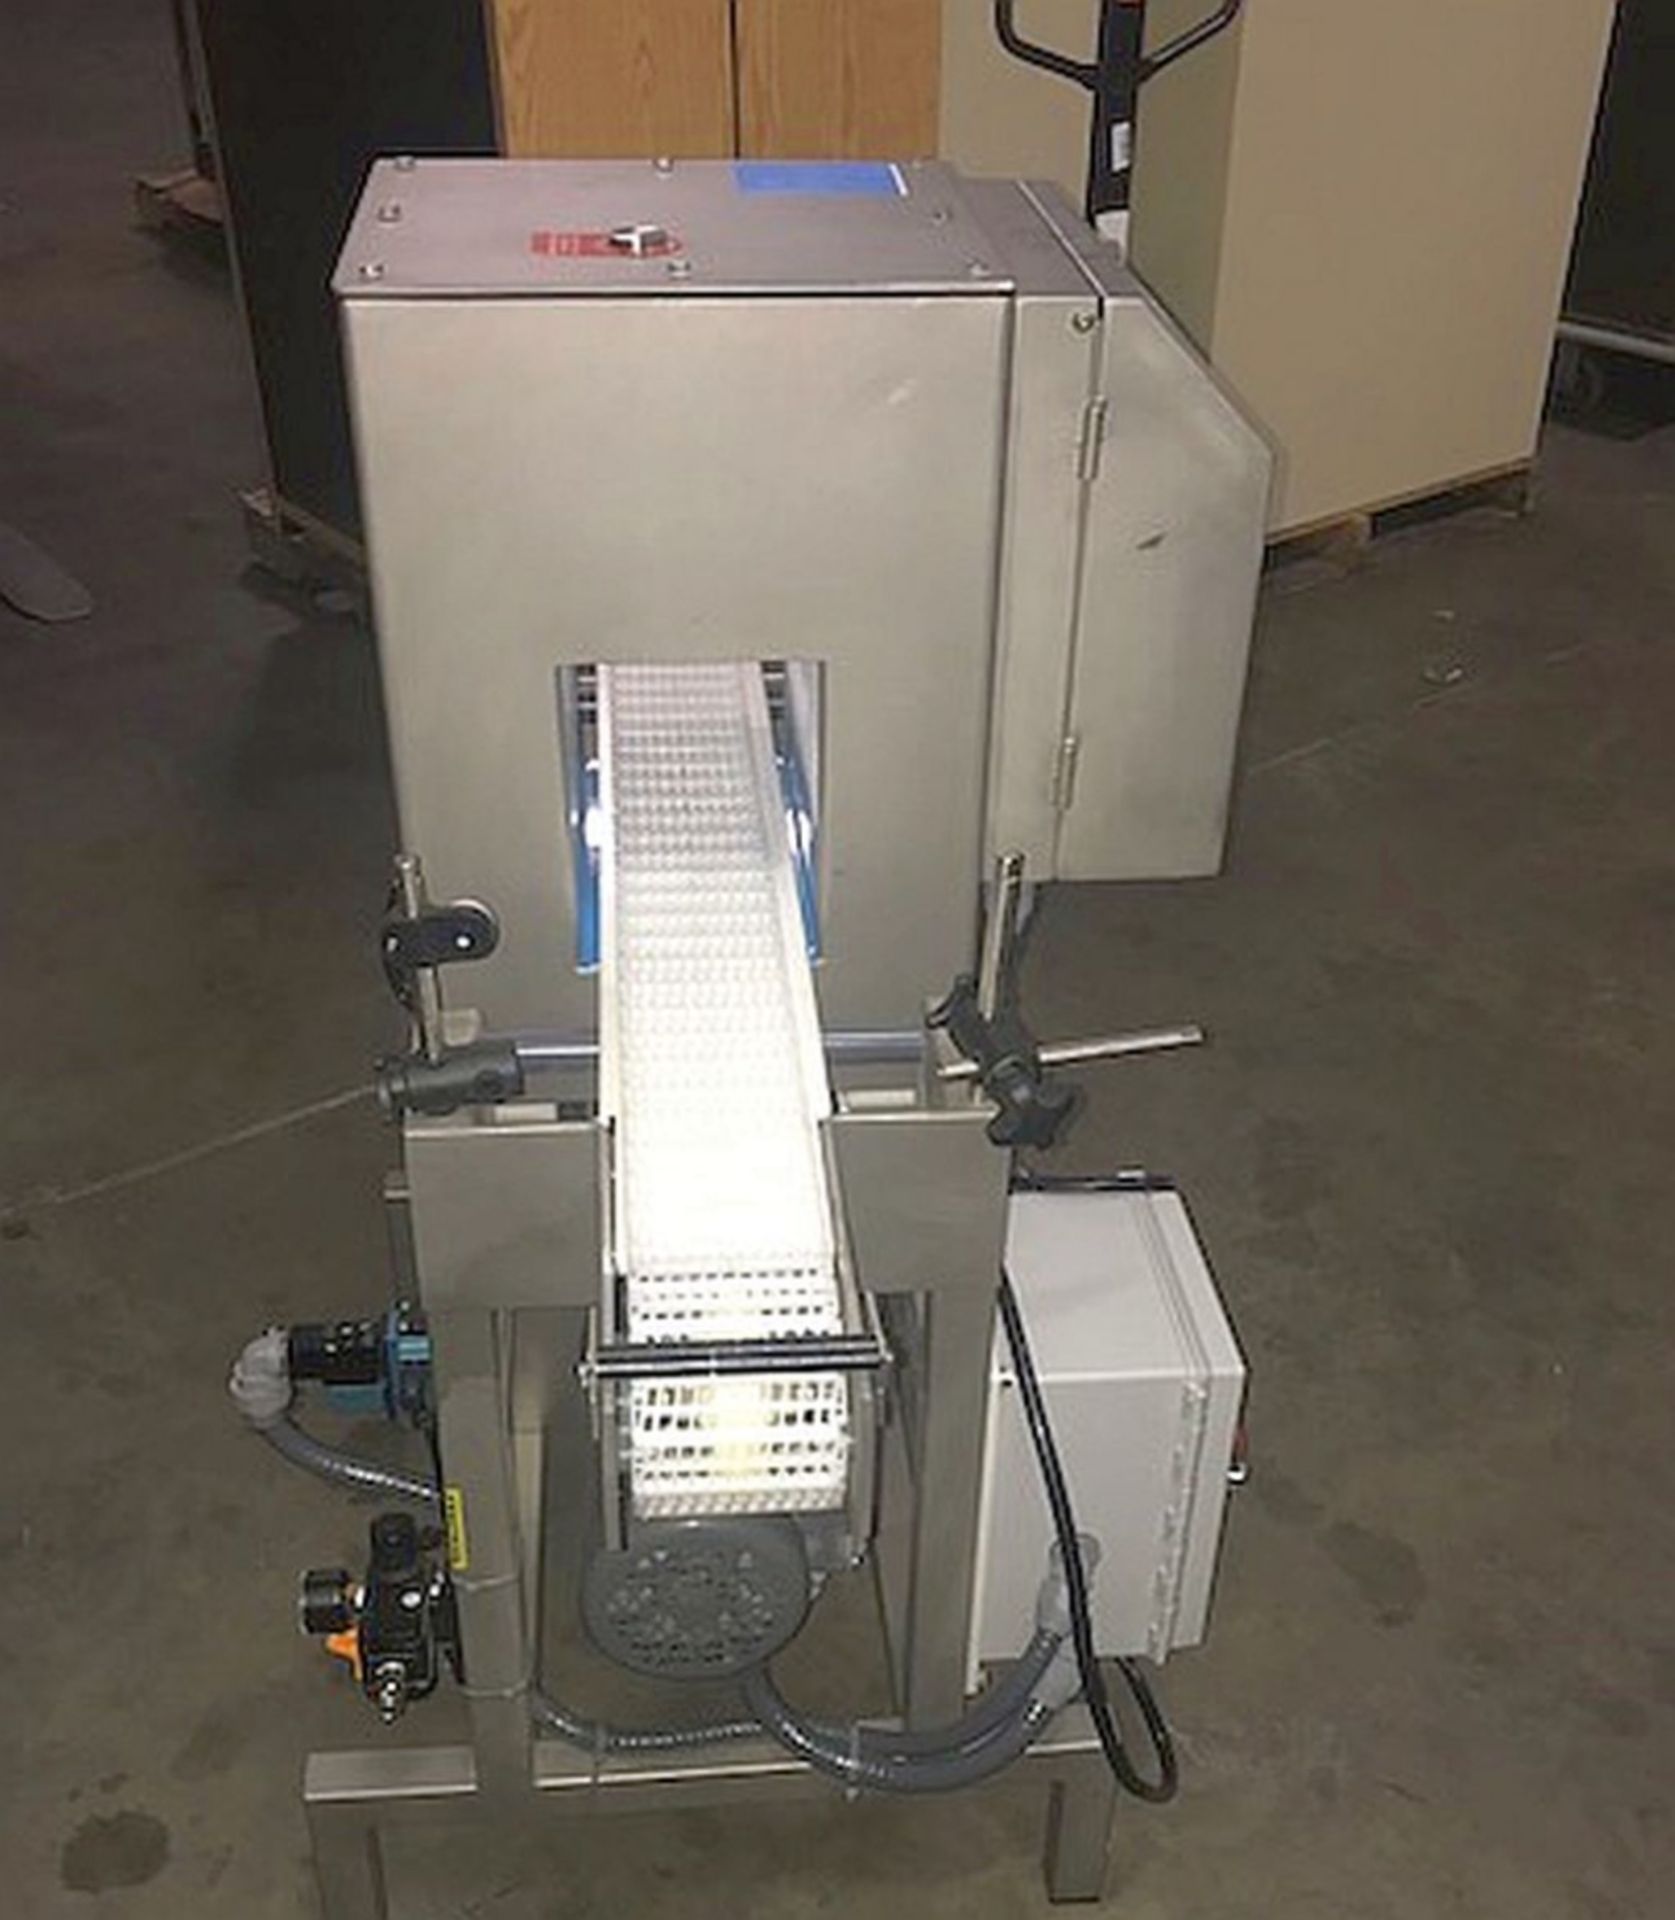 Loma Metal Detector, Model: IQ, Serial: KIMD12264, Unit comes with conveyor. Conveyor is 50 inches - Image 4 of 6